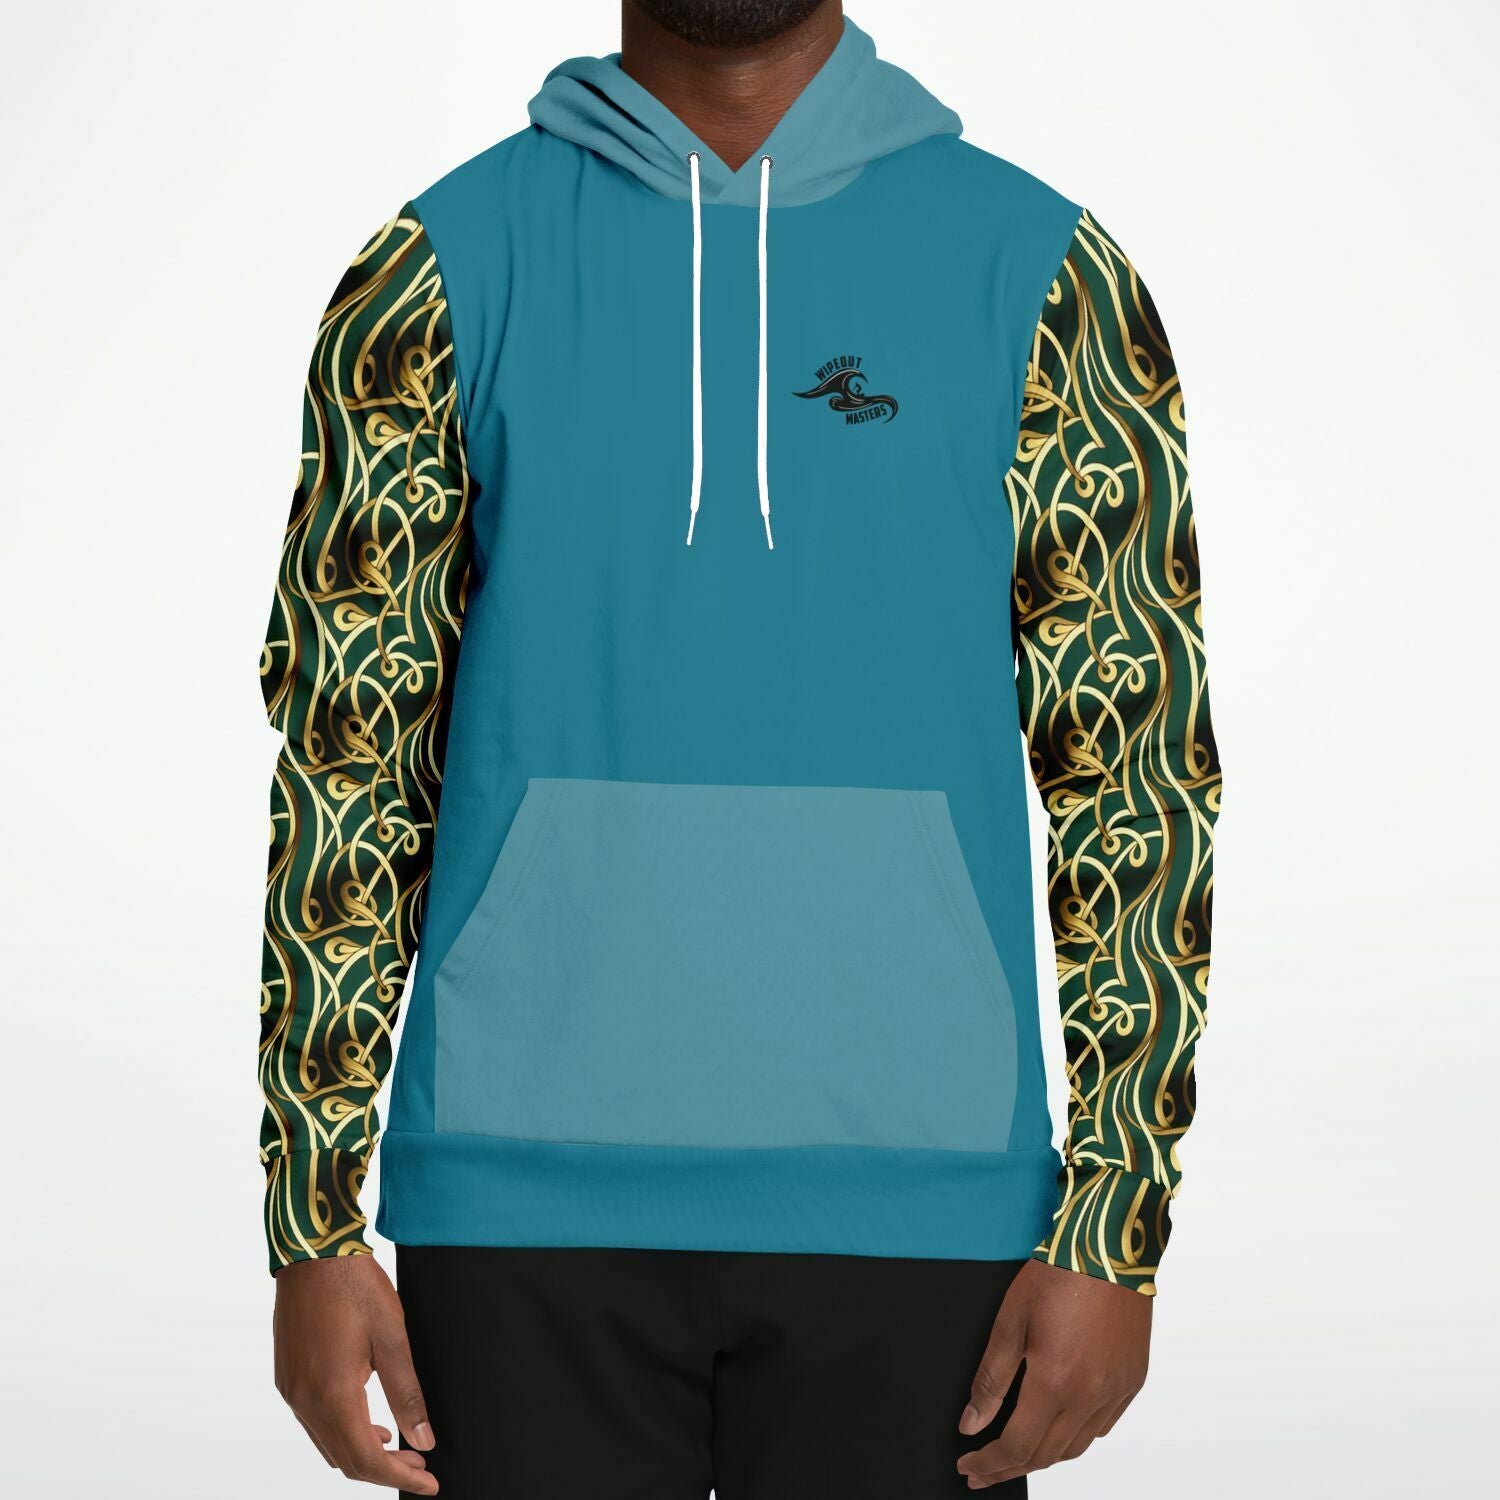 Celtic Surf Hoodie with Surfer Graphic - Catch Waves in Style